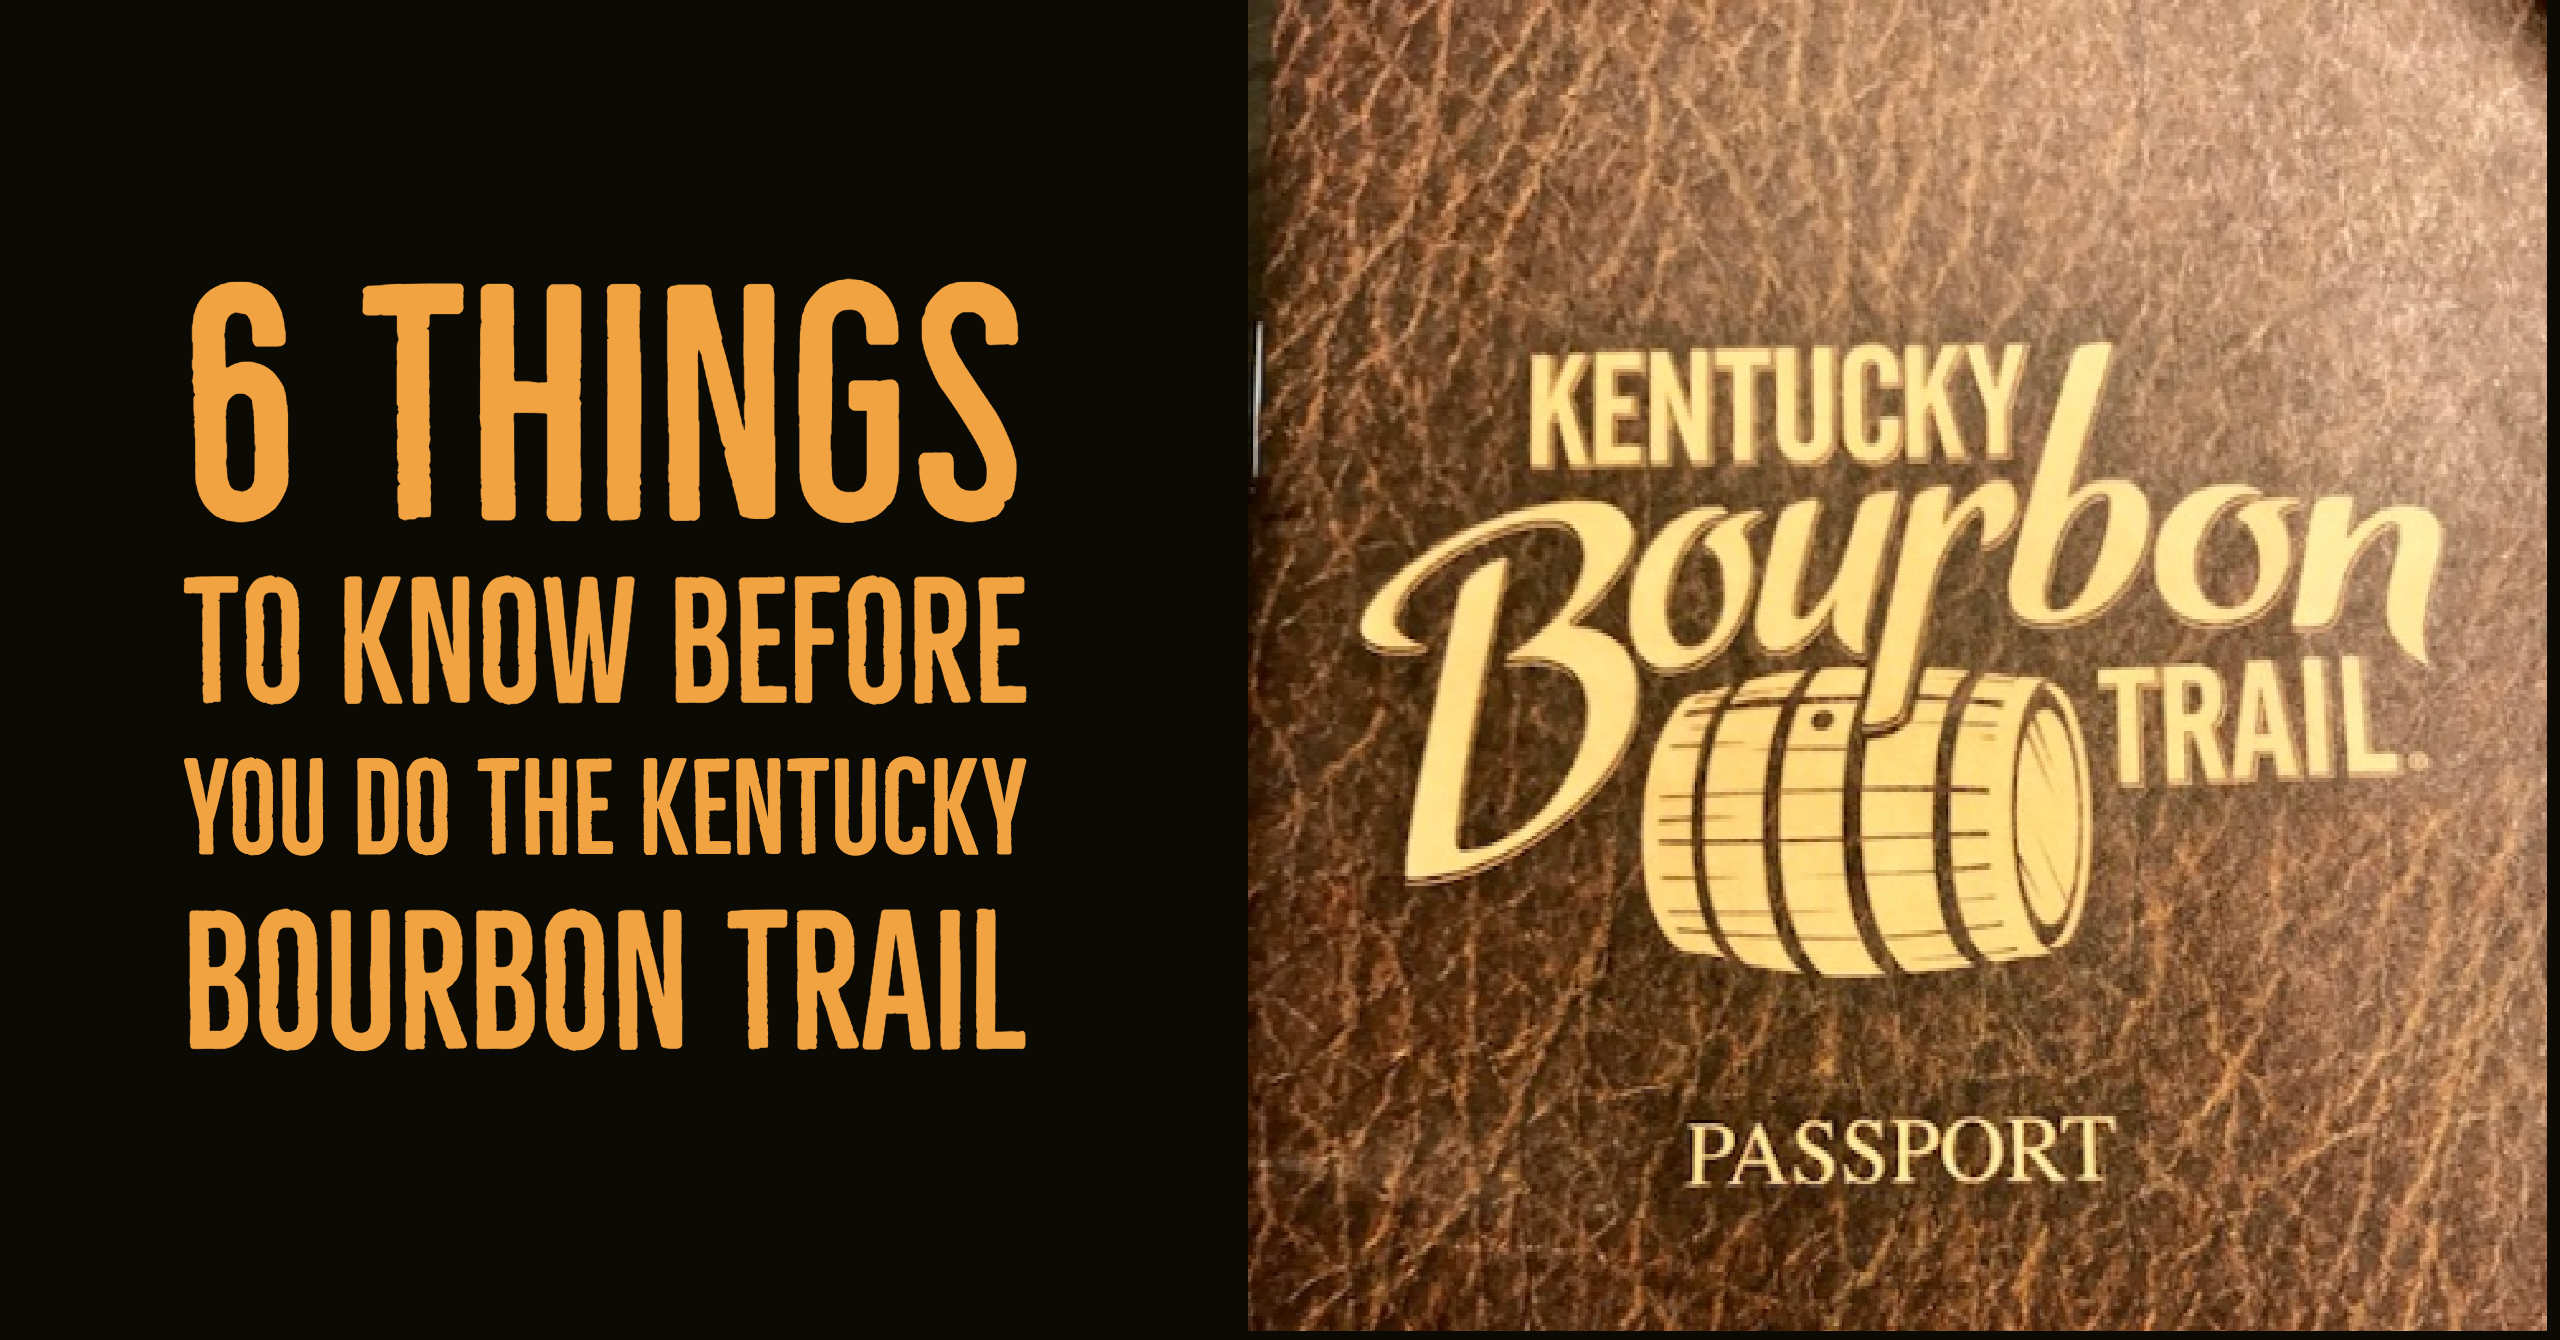 6 things to know before you do Kentucky Bourbon Trail